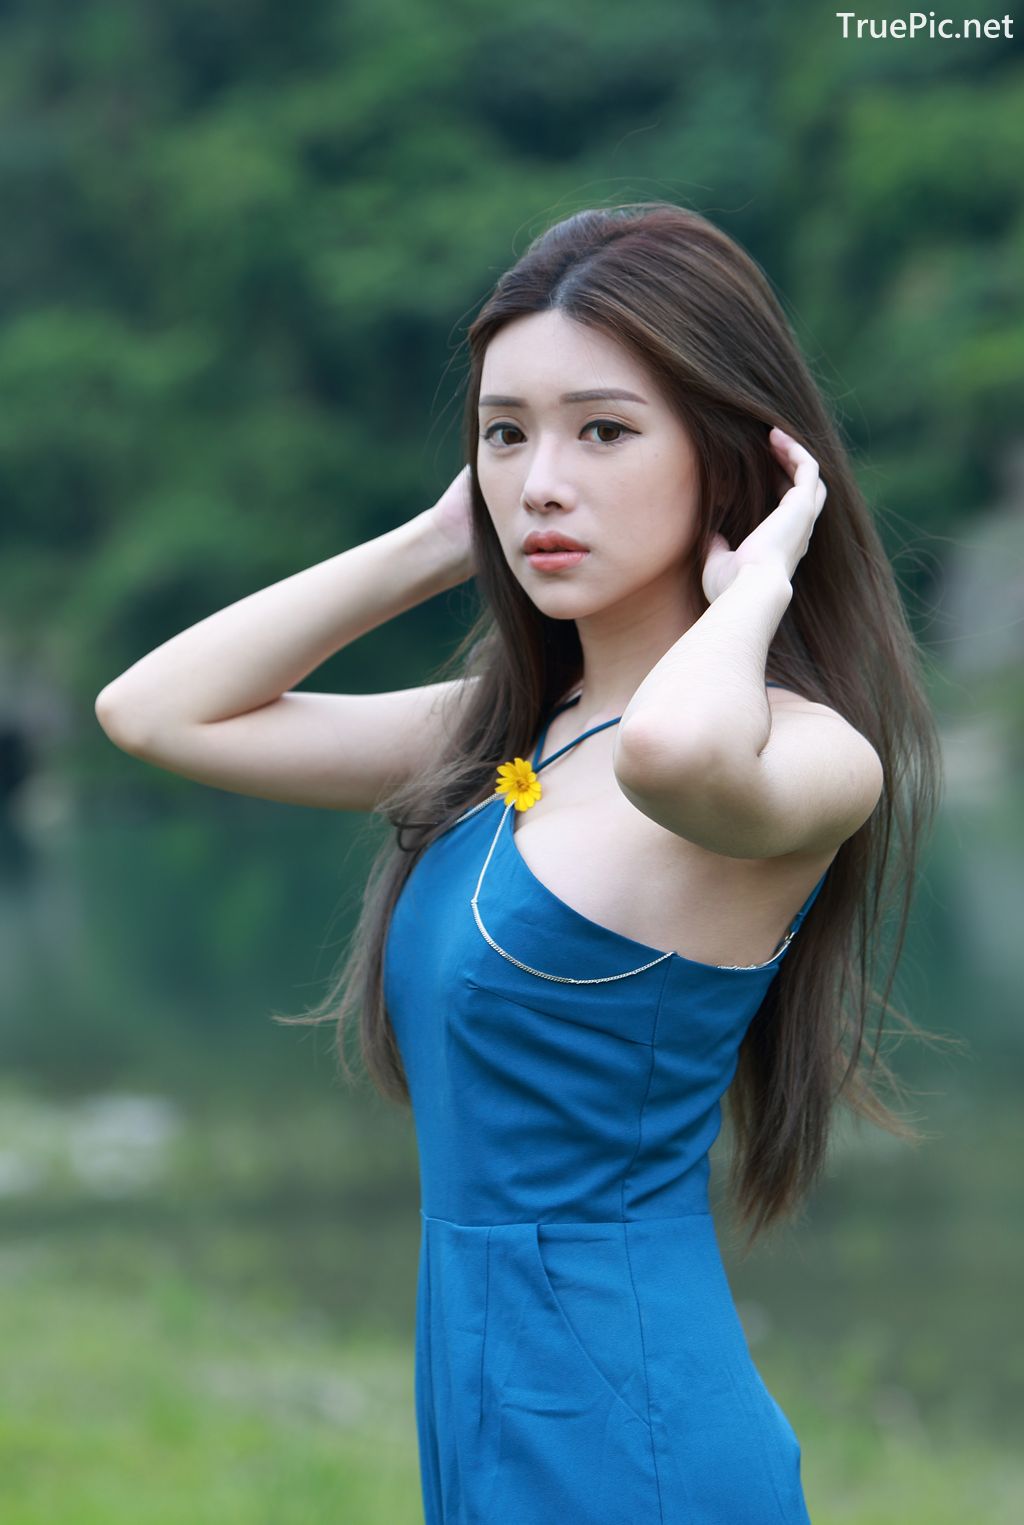 Image-Taiwanese-Pure-Girl-承容-Young-Beautiful-And-Lovely-TruePic.net- Picture-54